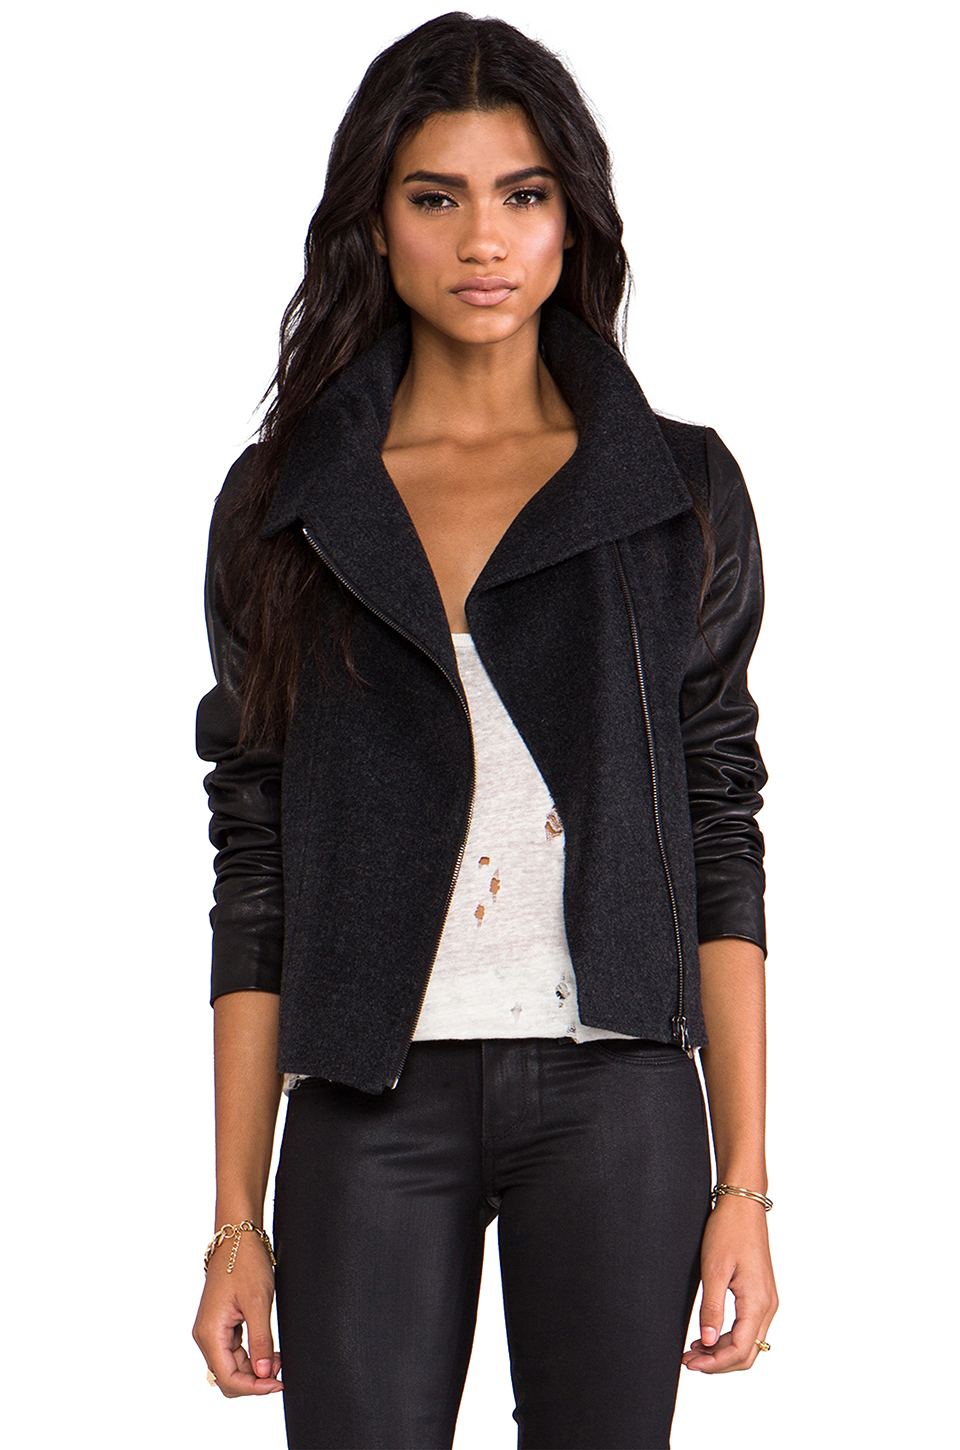 Lyst - Vince Funnel Neck Jacket with Leather Sleeves in Charcoal in Gray